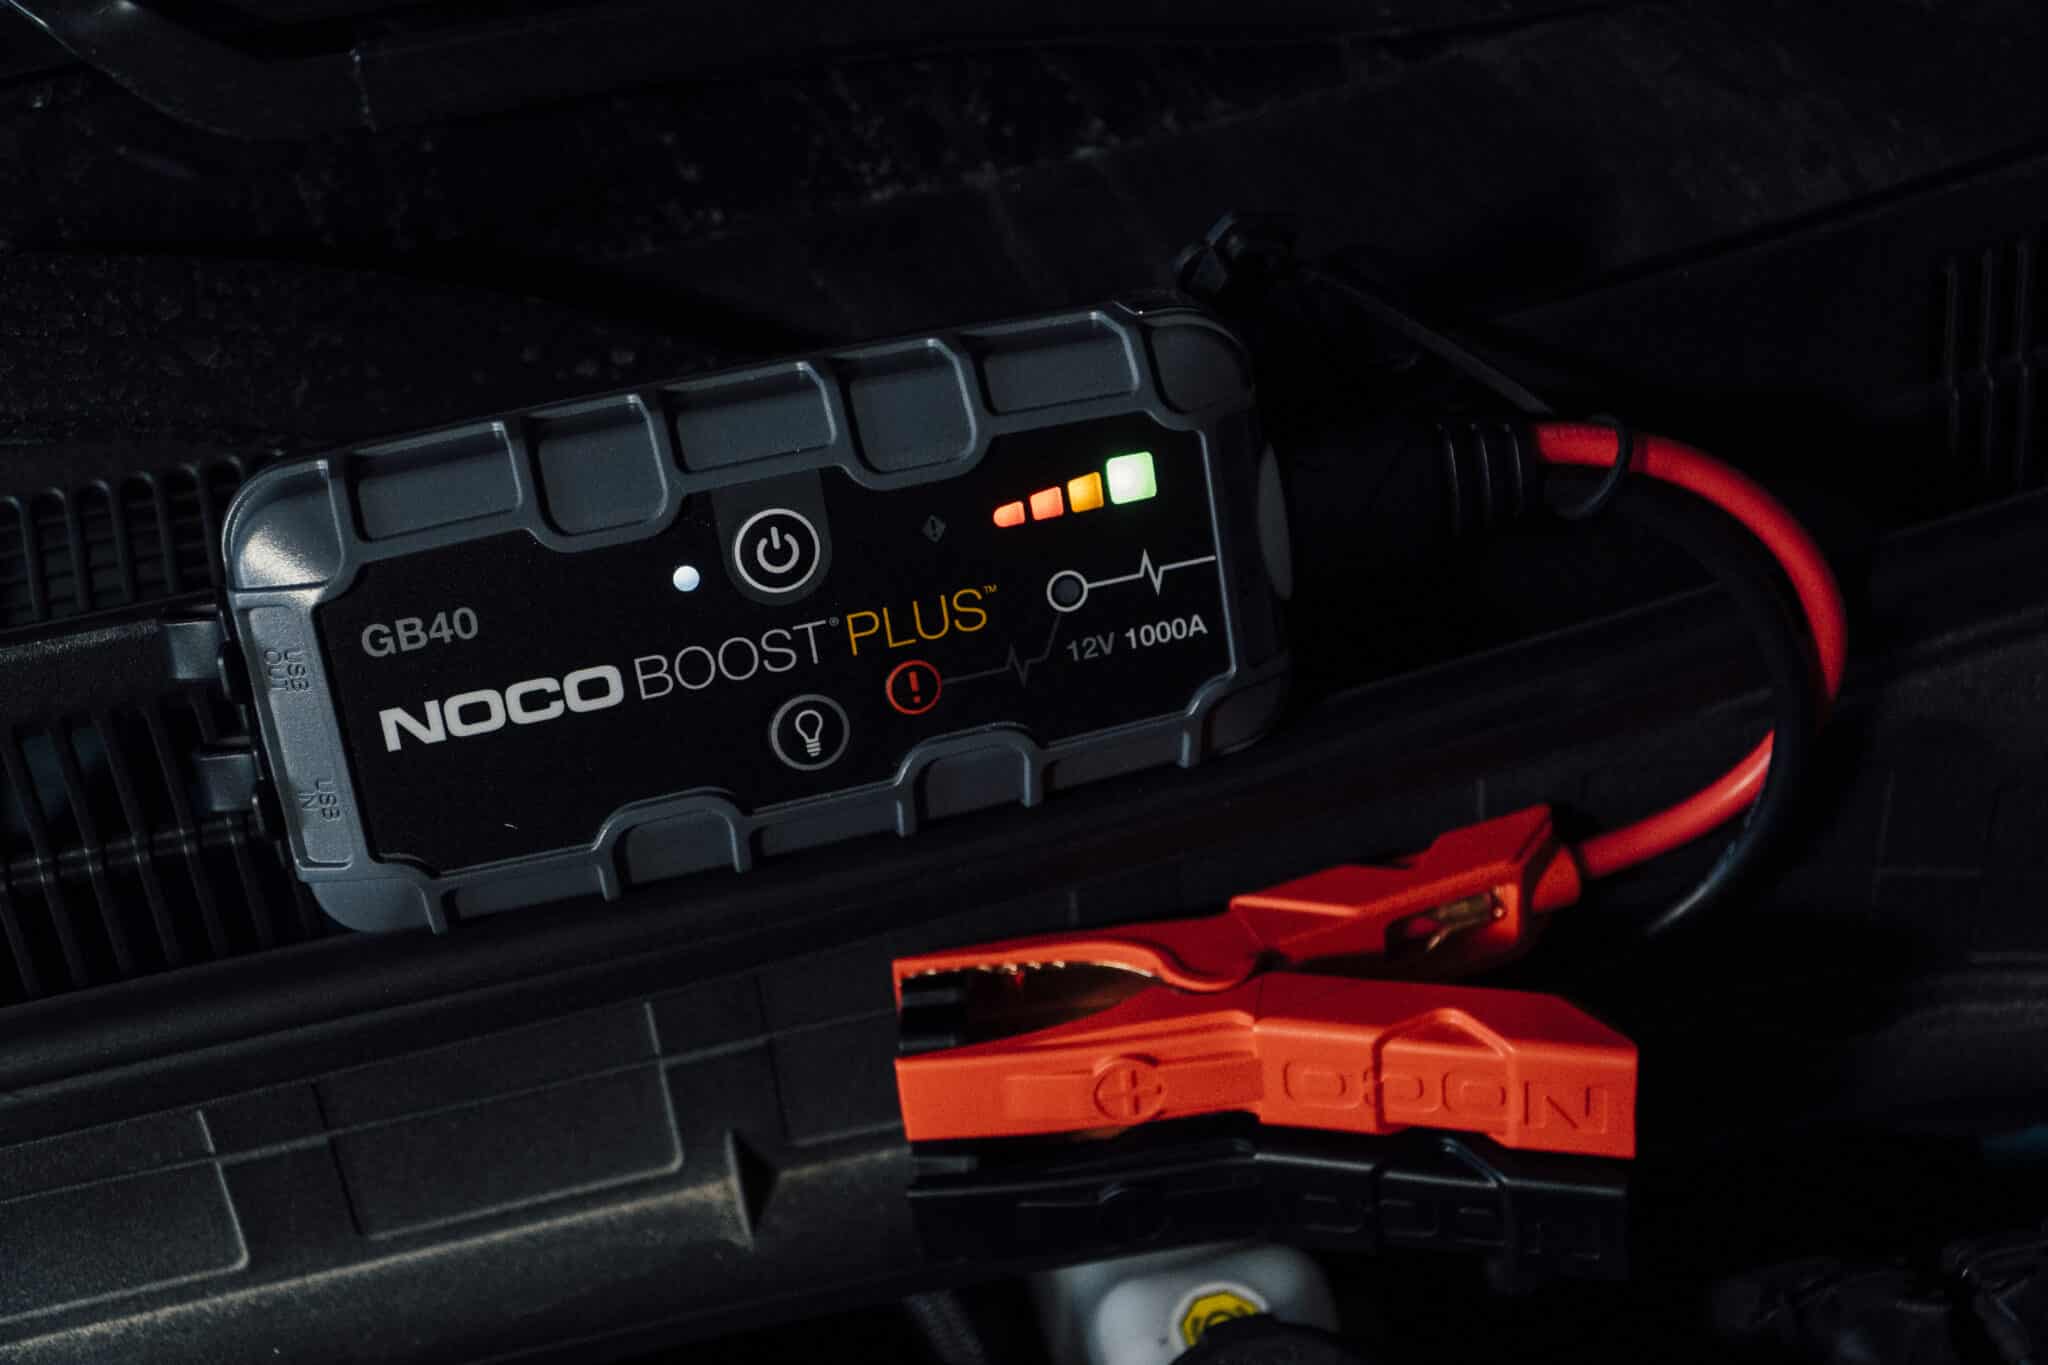 NOCO GB40 vs. NOCO GB70: The Difference Between These Portable Jump Starters & Which You Should Buy